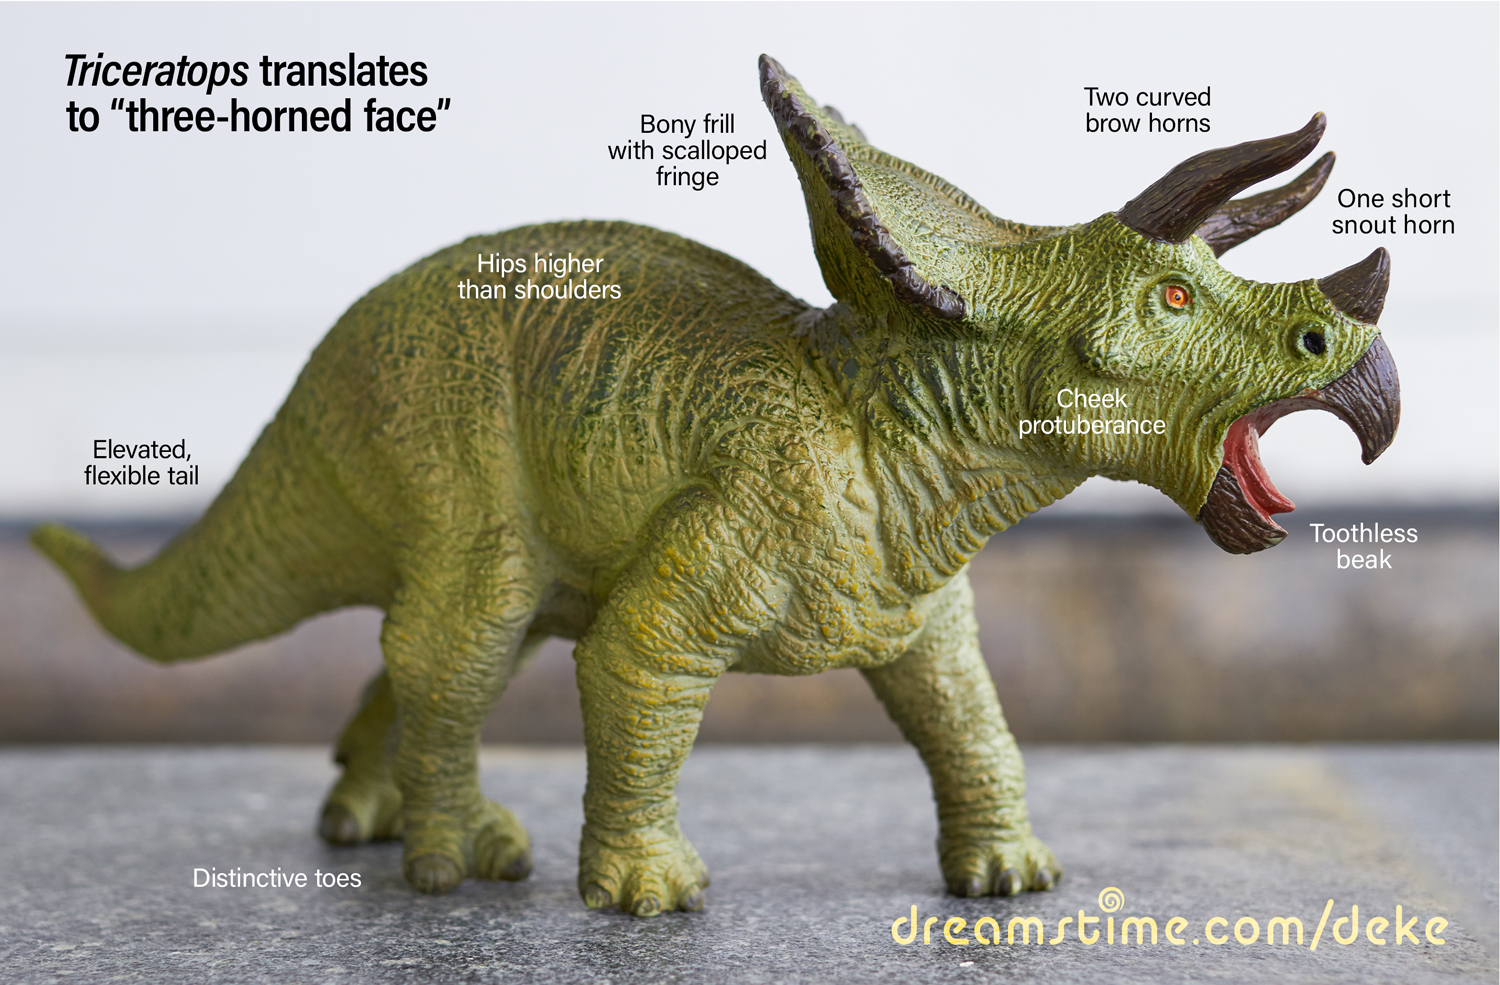 A model of a triceratops with anatomical labels courtesy of Dreamstime.com